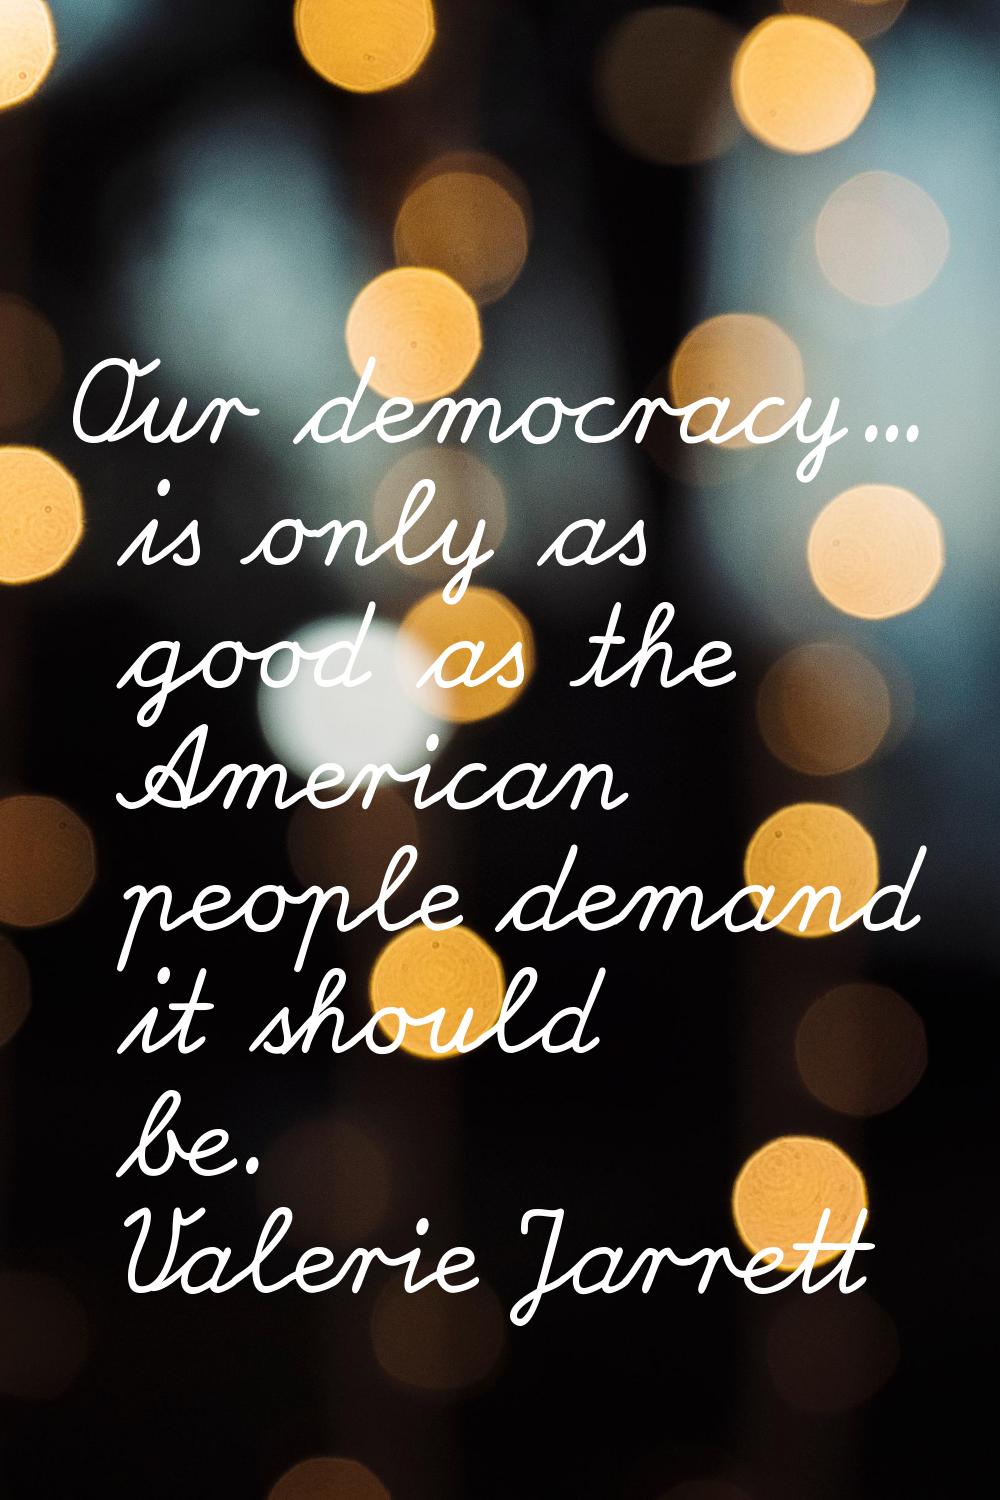 Our democracy... is only as good as the American people demand it should be.